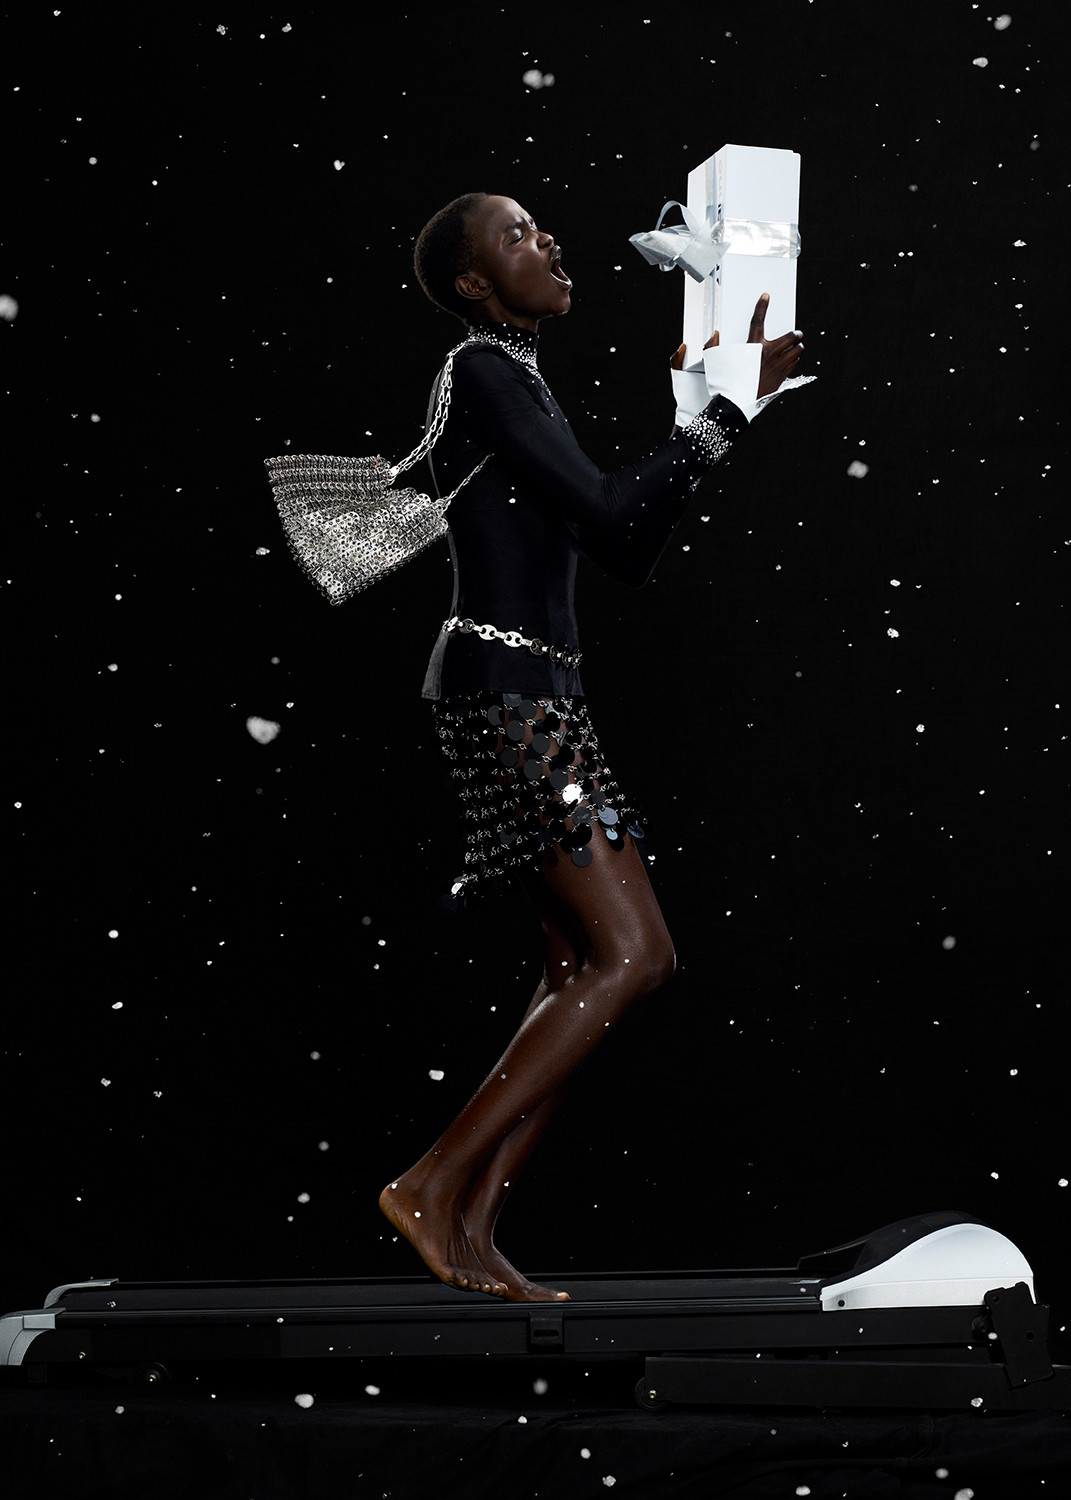 Paco Rabanne Holiday, shot by Studio l'étiquette - © artifices